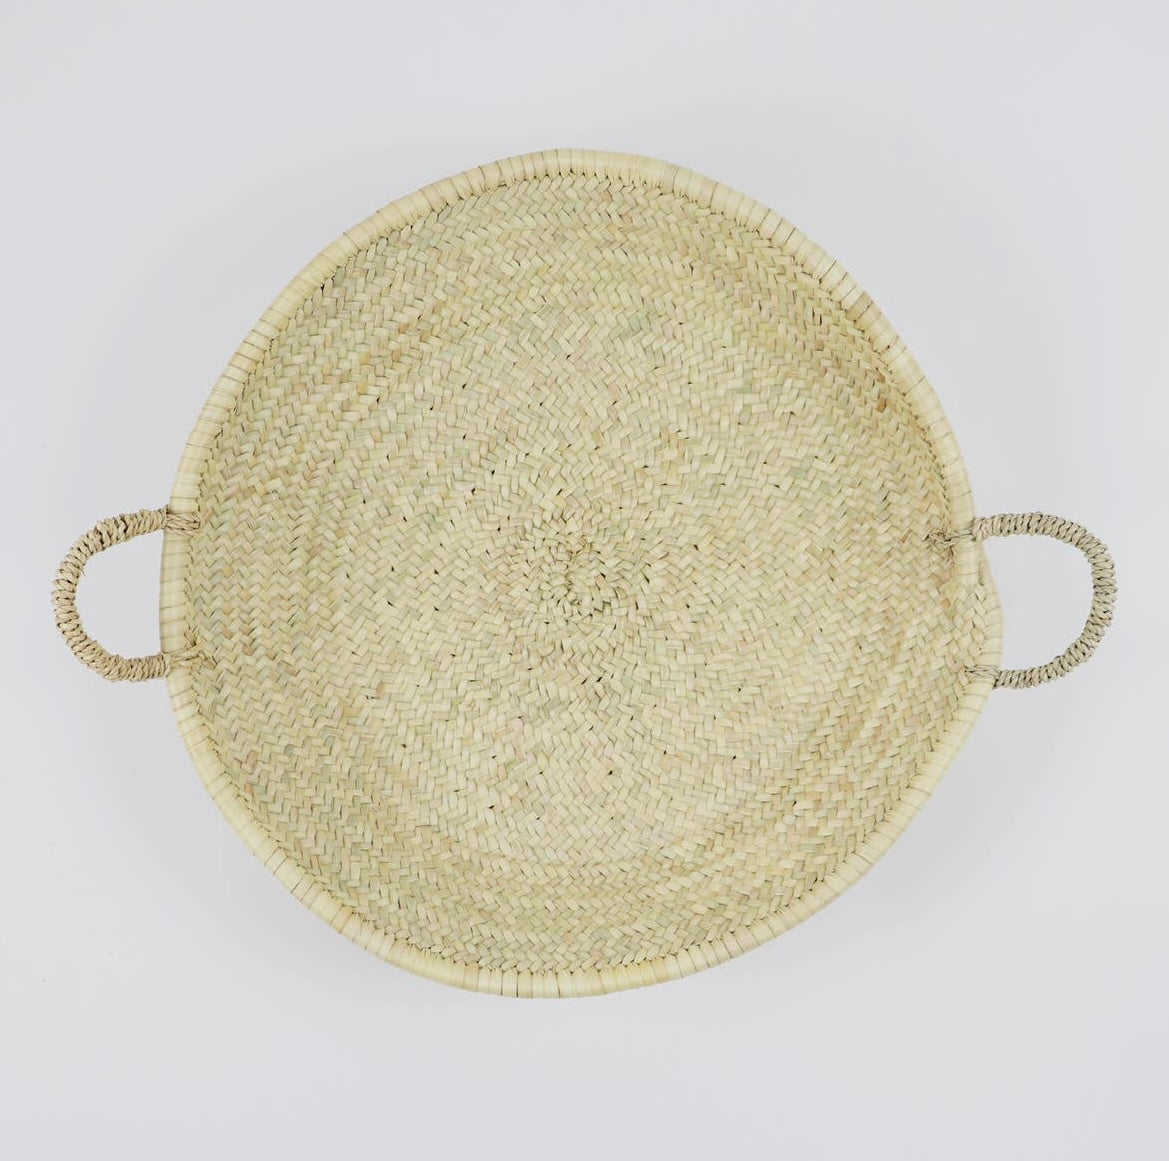 Moroccan Straw Woven Plate - 3 sizes